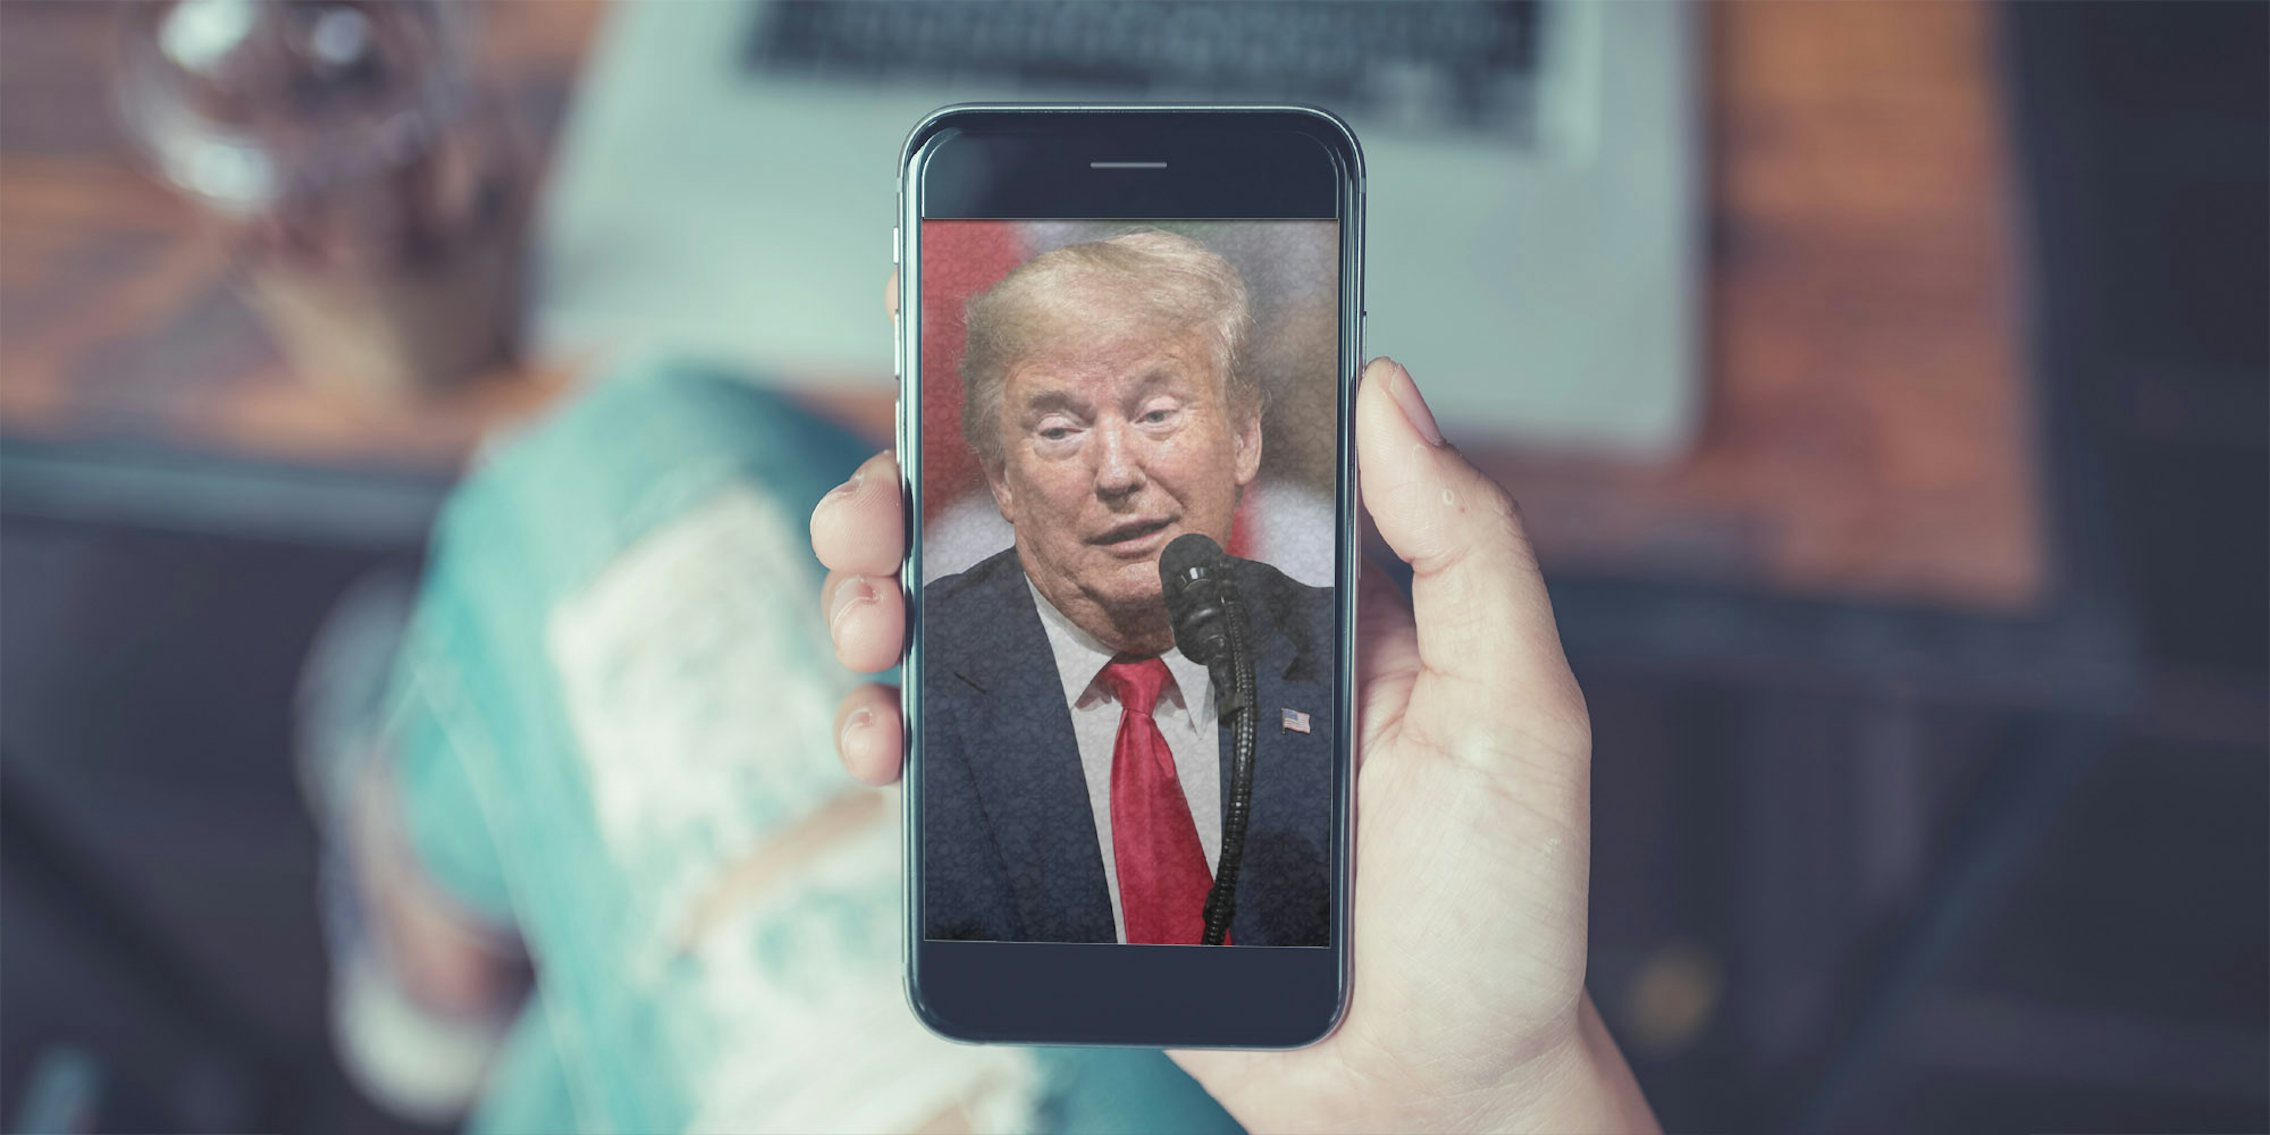 The face of former President Donald Trump on a phone like it would show up when a social media app launches.